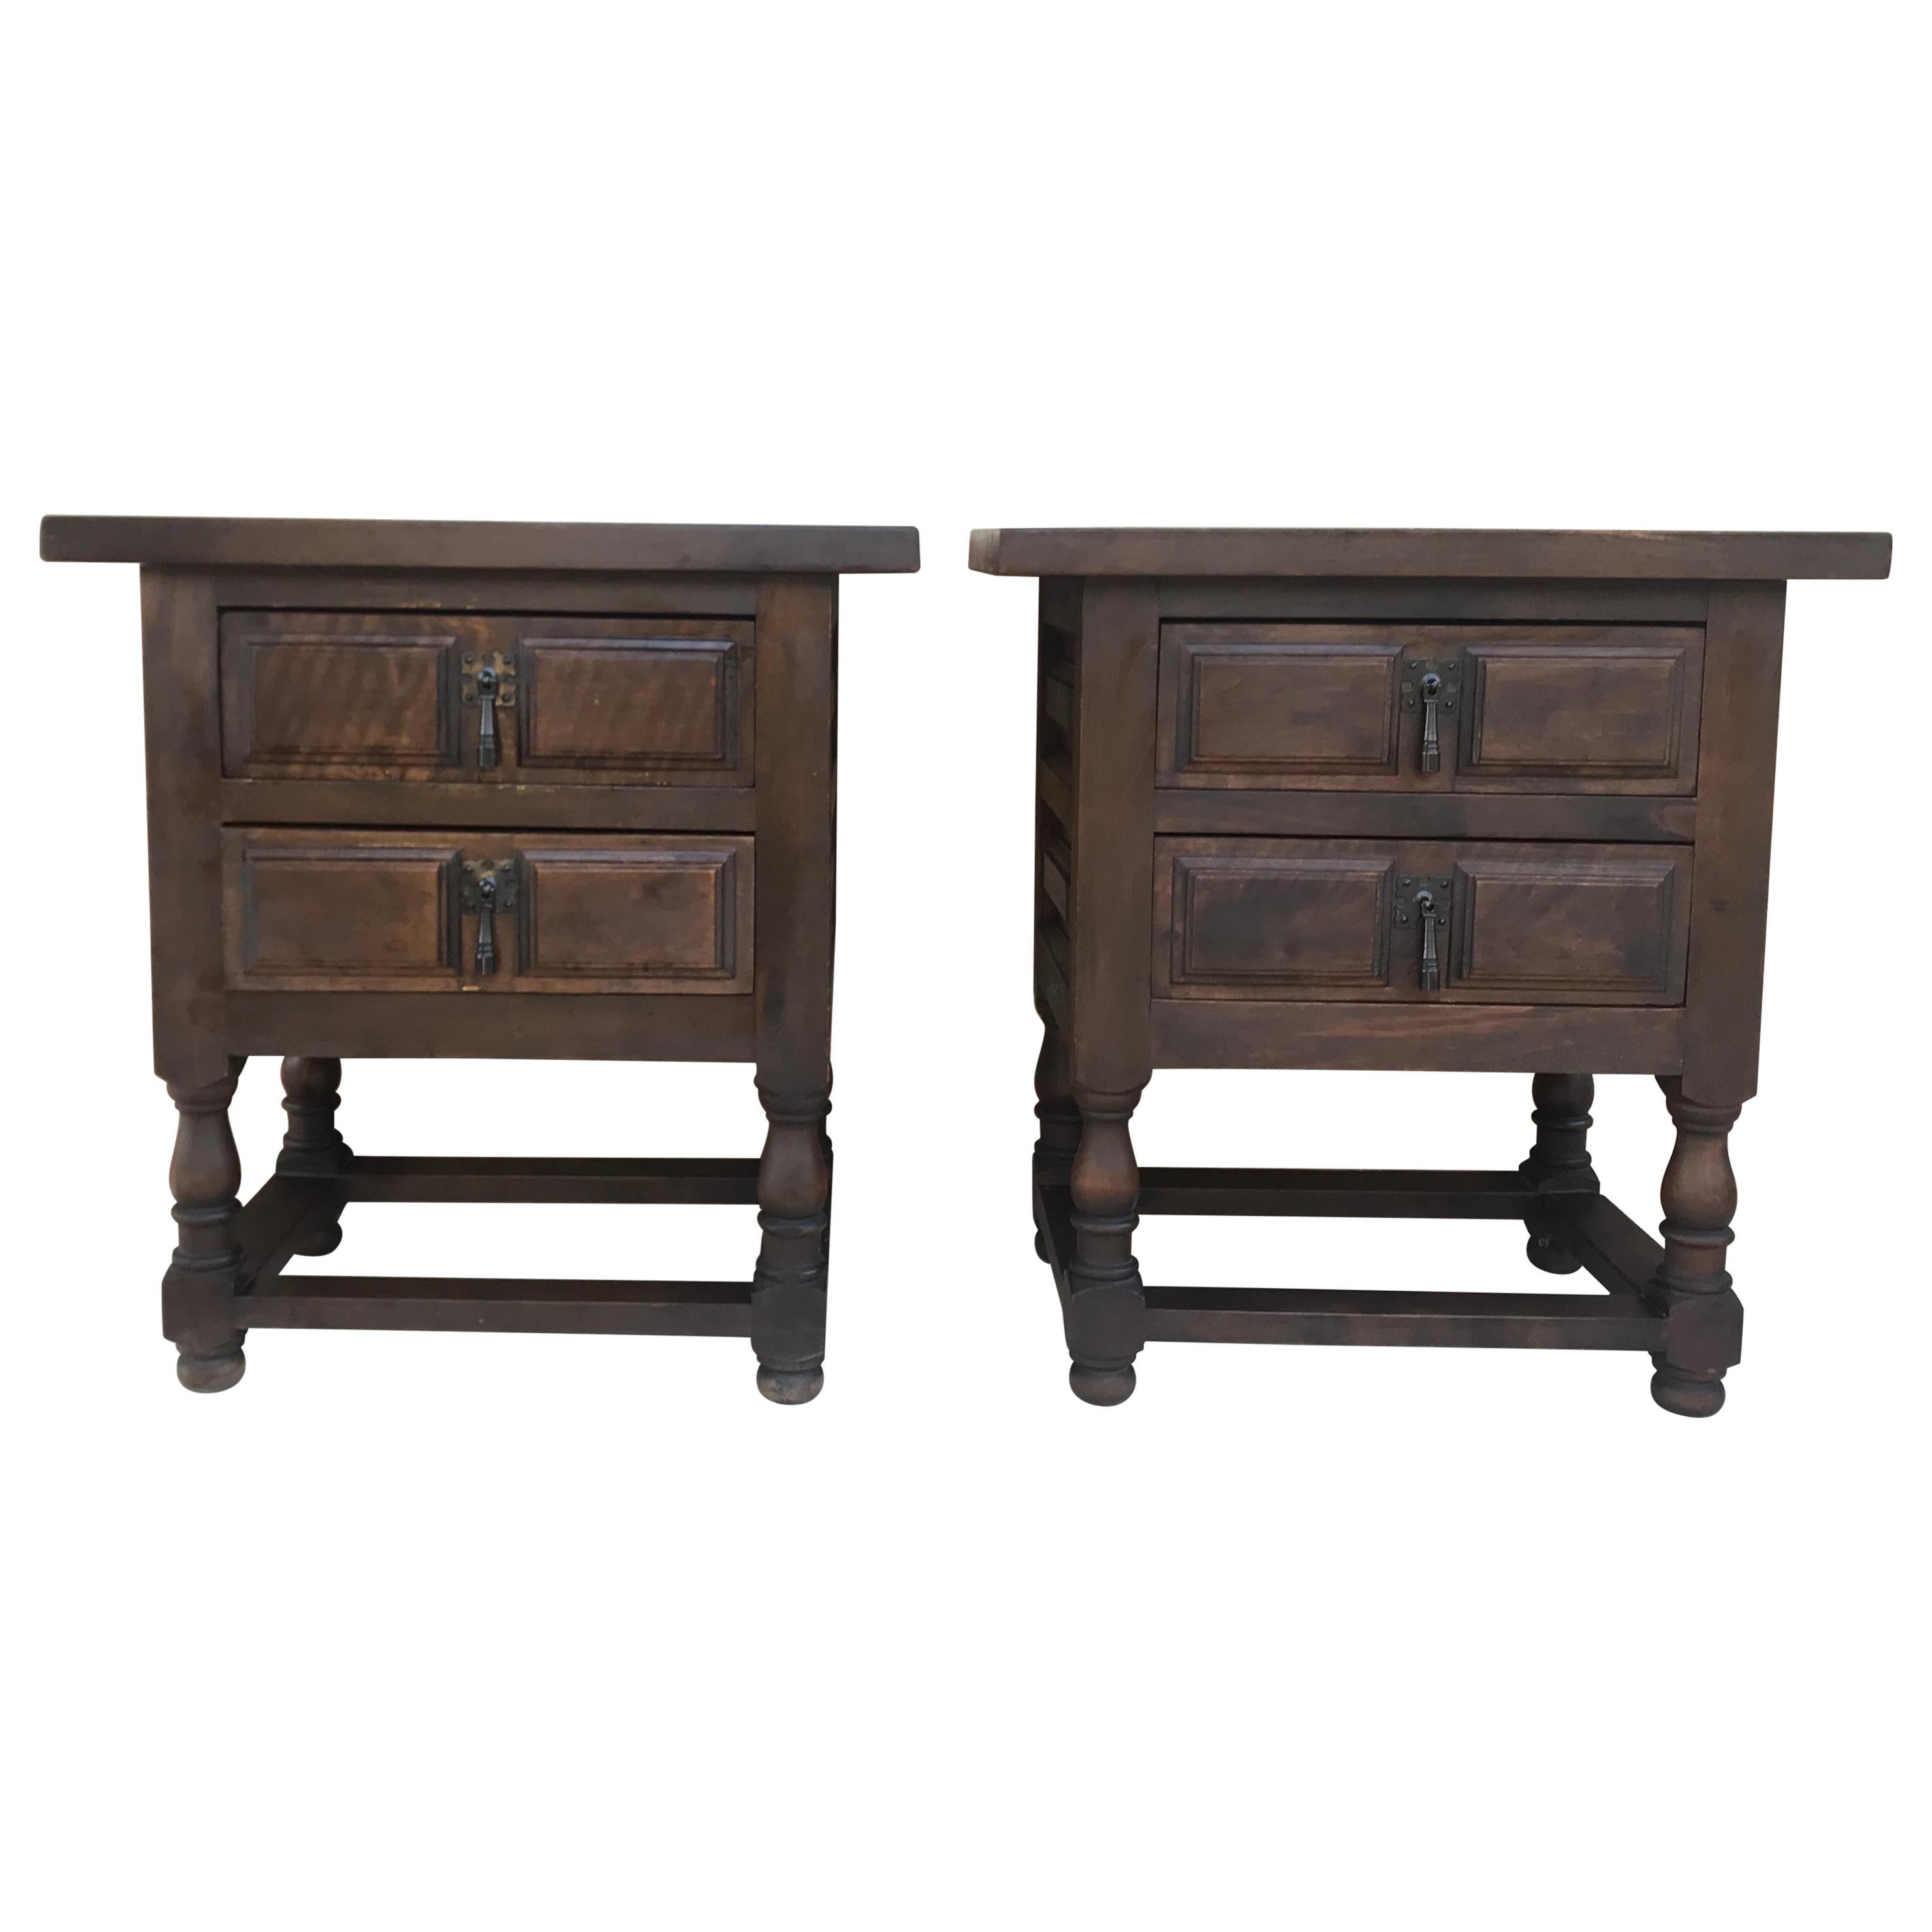 20th Century Pair of Spanish Nightstands with Two Drawers and Iron Hardware